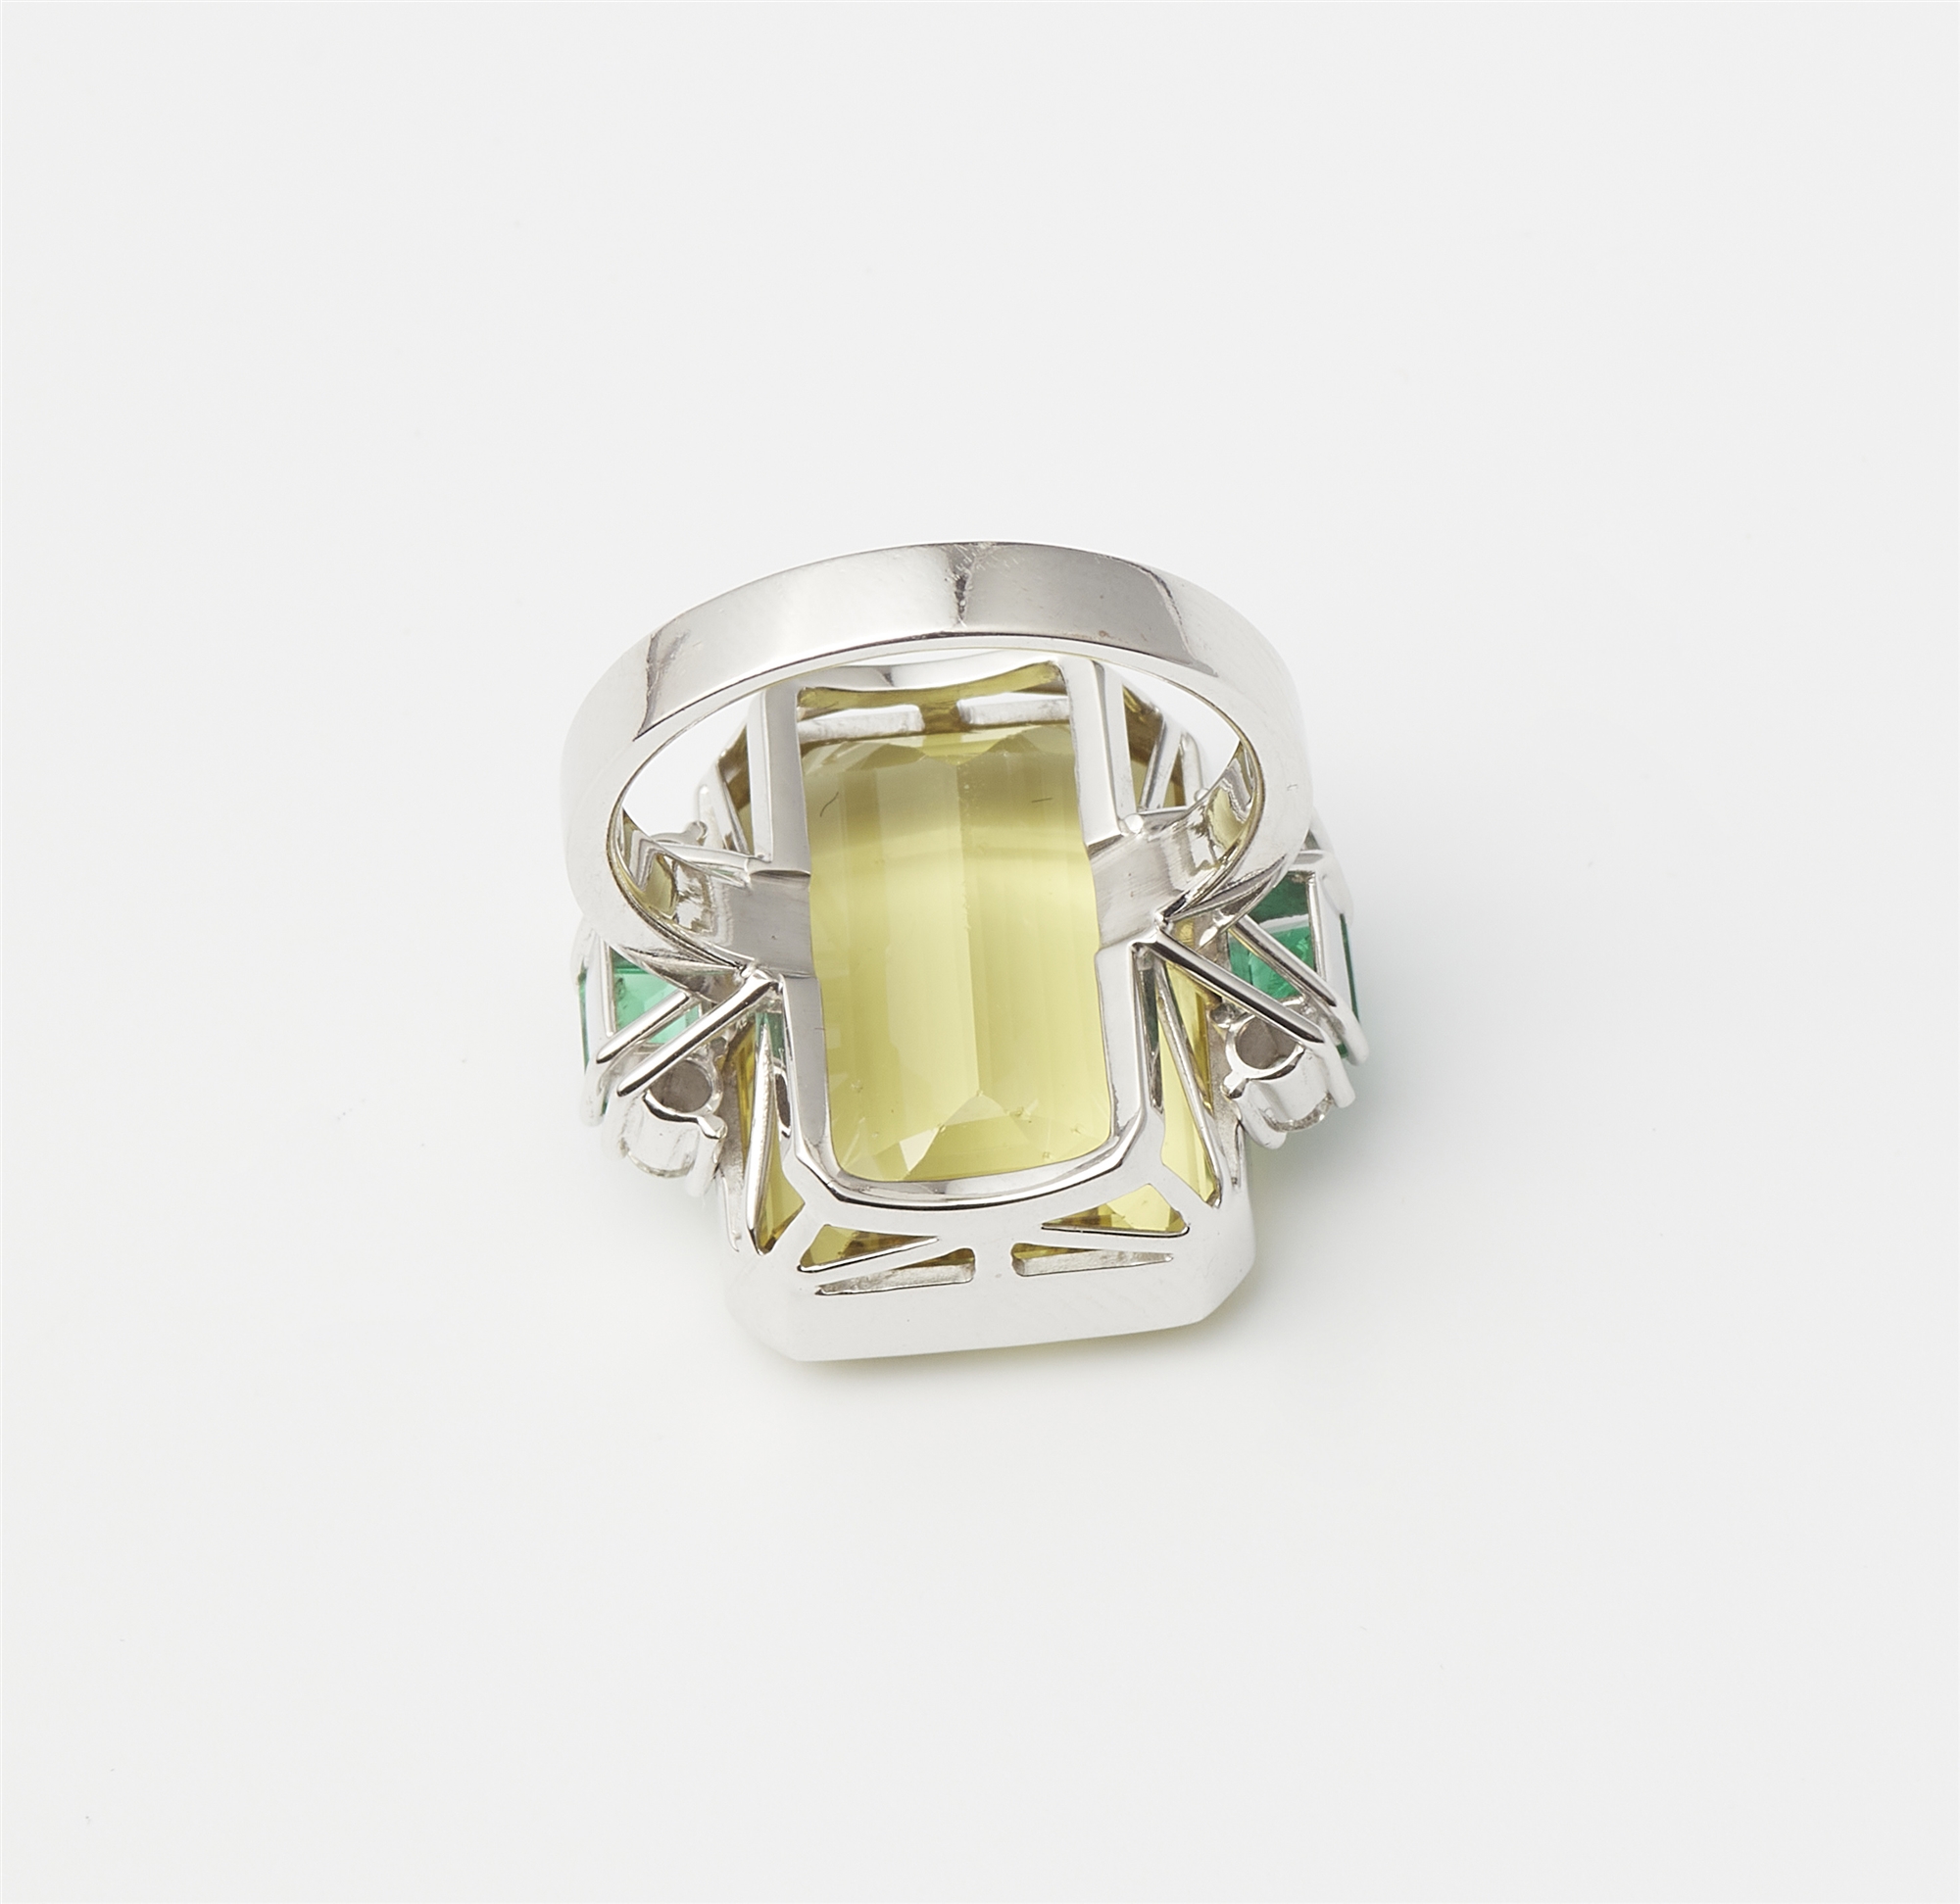 An 18k white gold diamond emerald and natural heliodor (lemon green beryl) ring. - Image 2 of 3